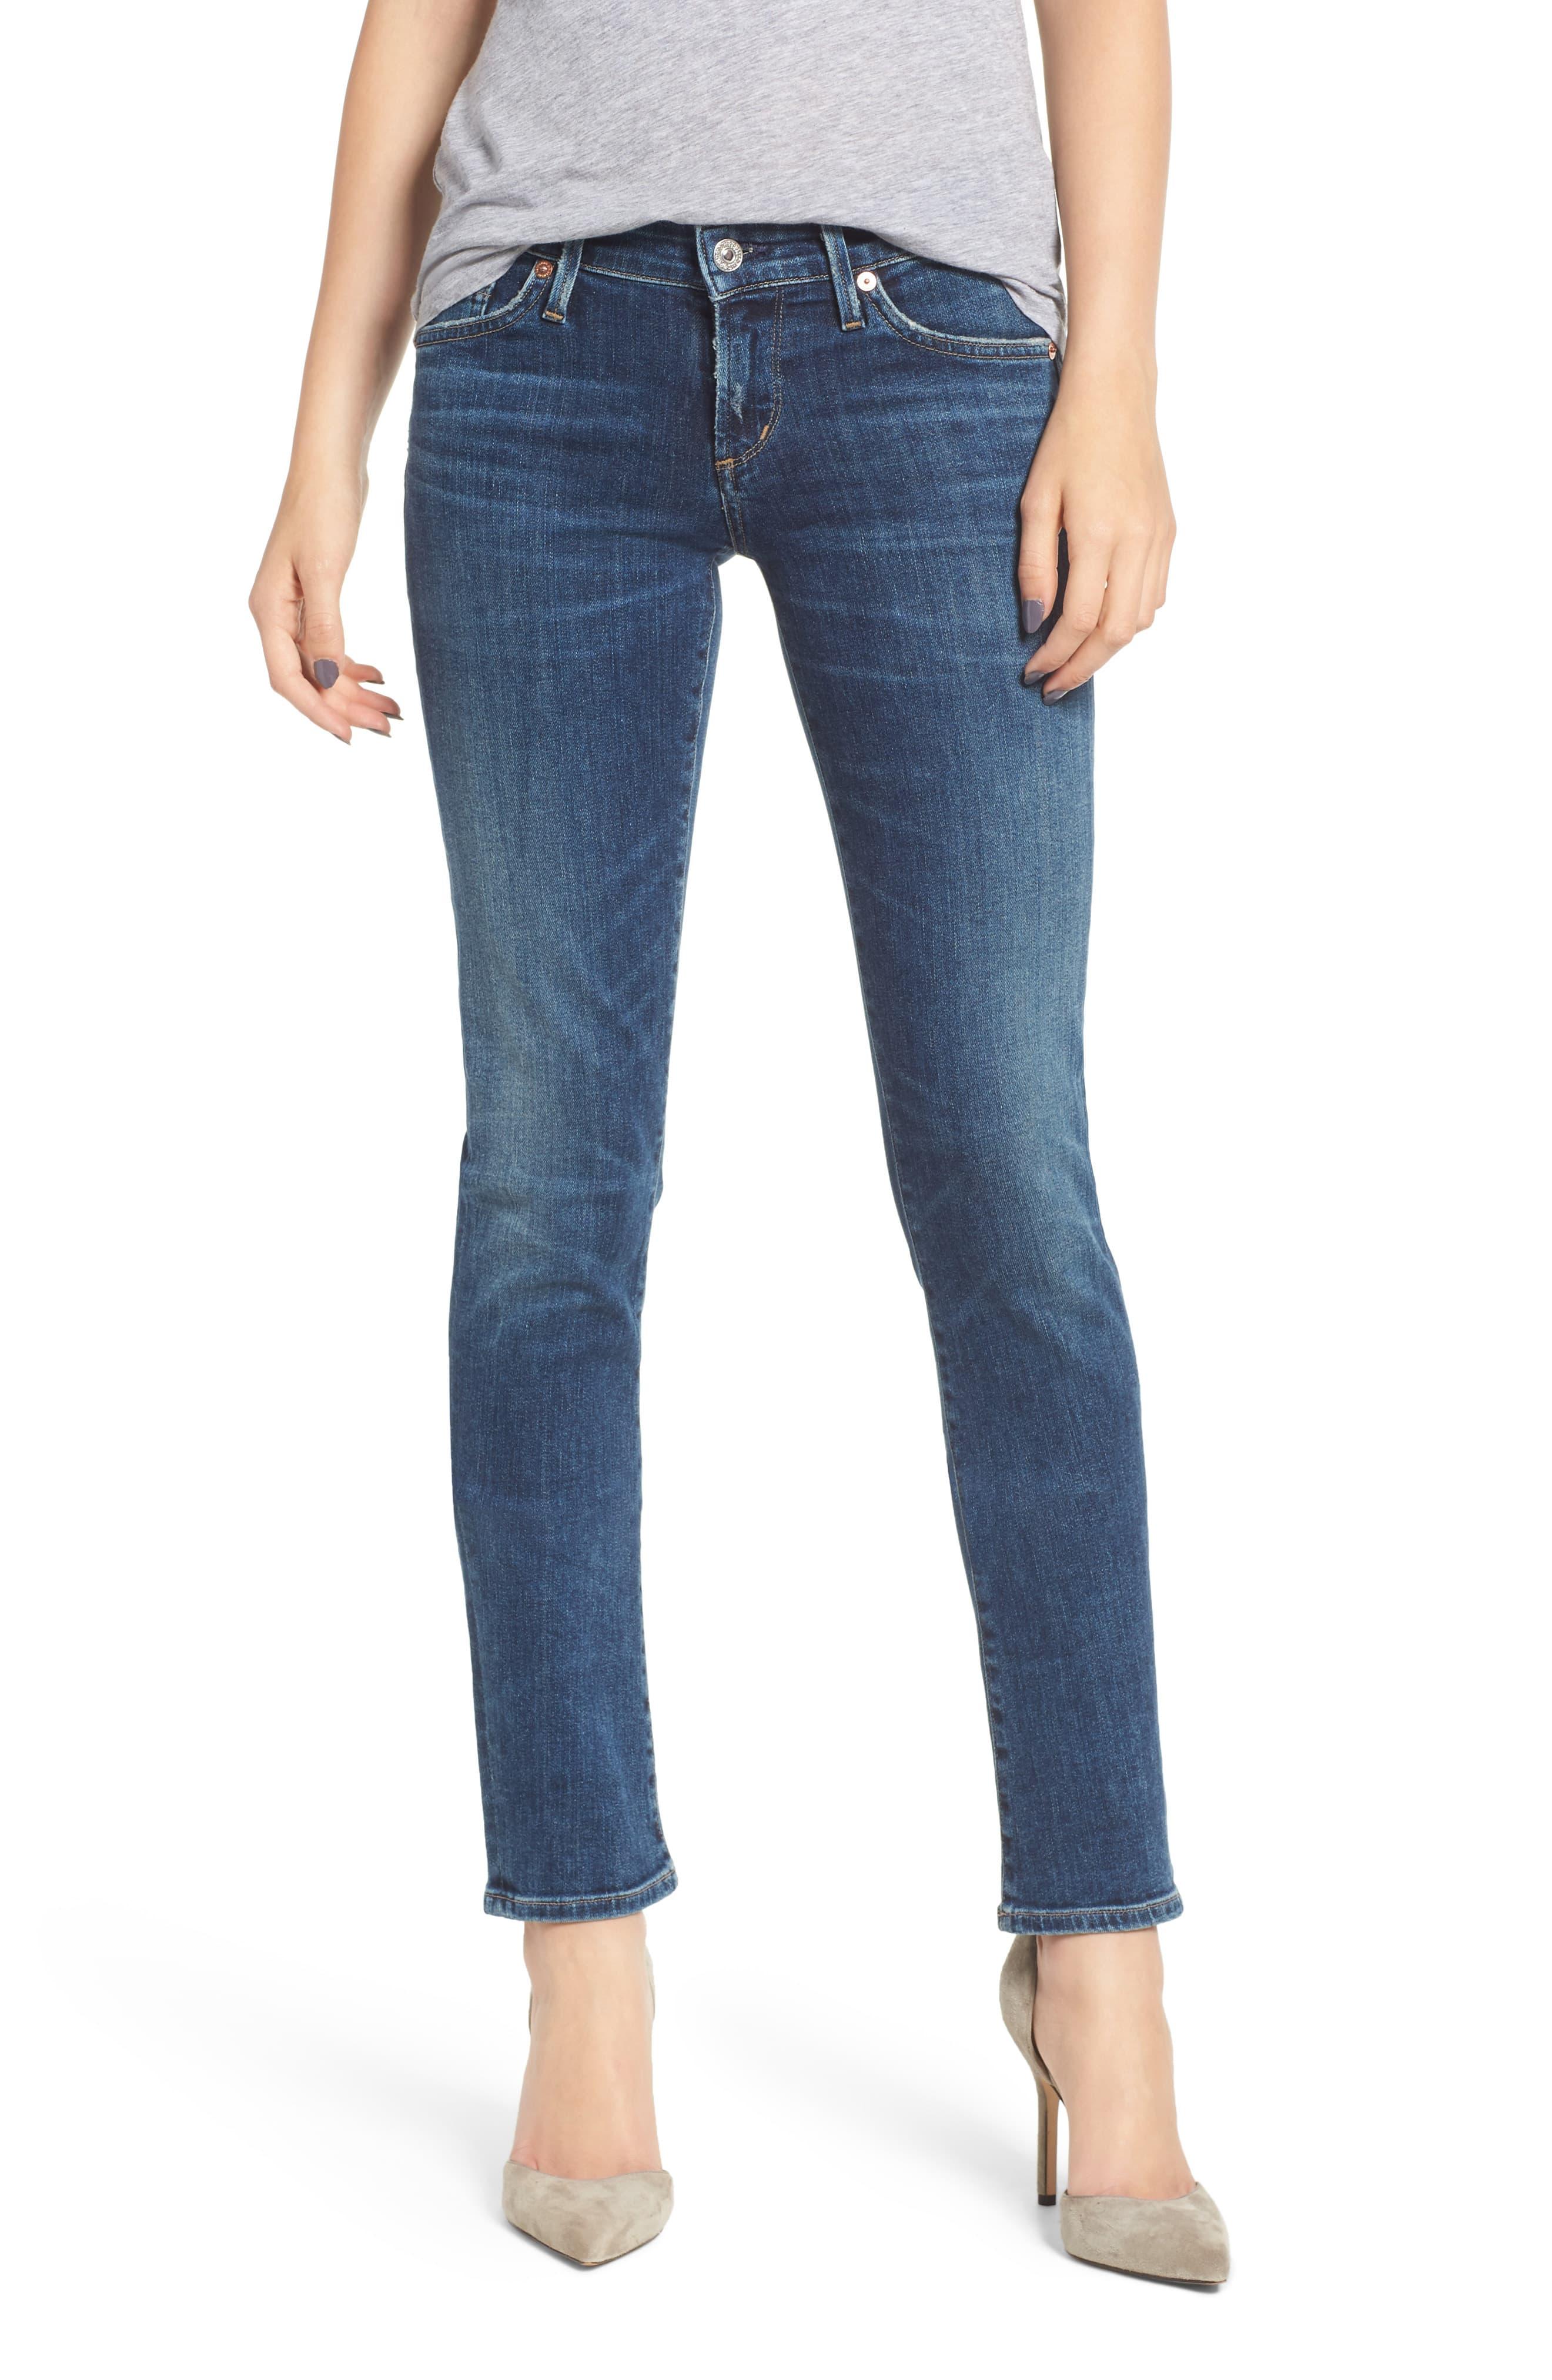 Citizens of Humanity Denim Racer Slim Jeans in Blue - Lyst